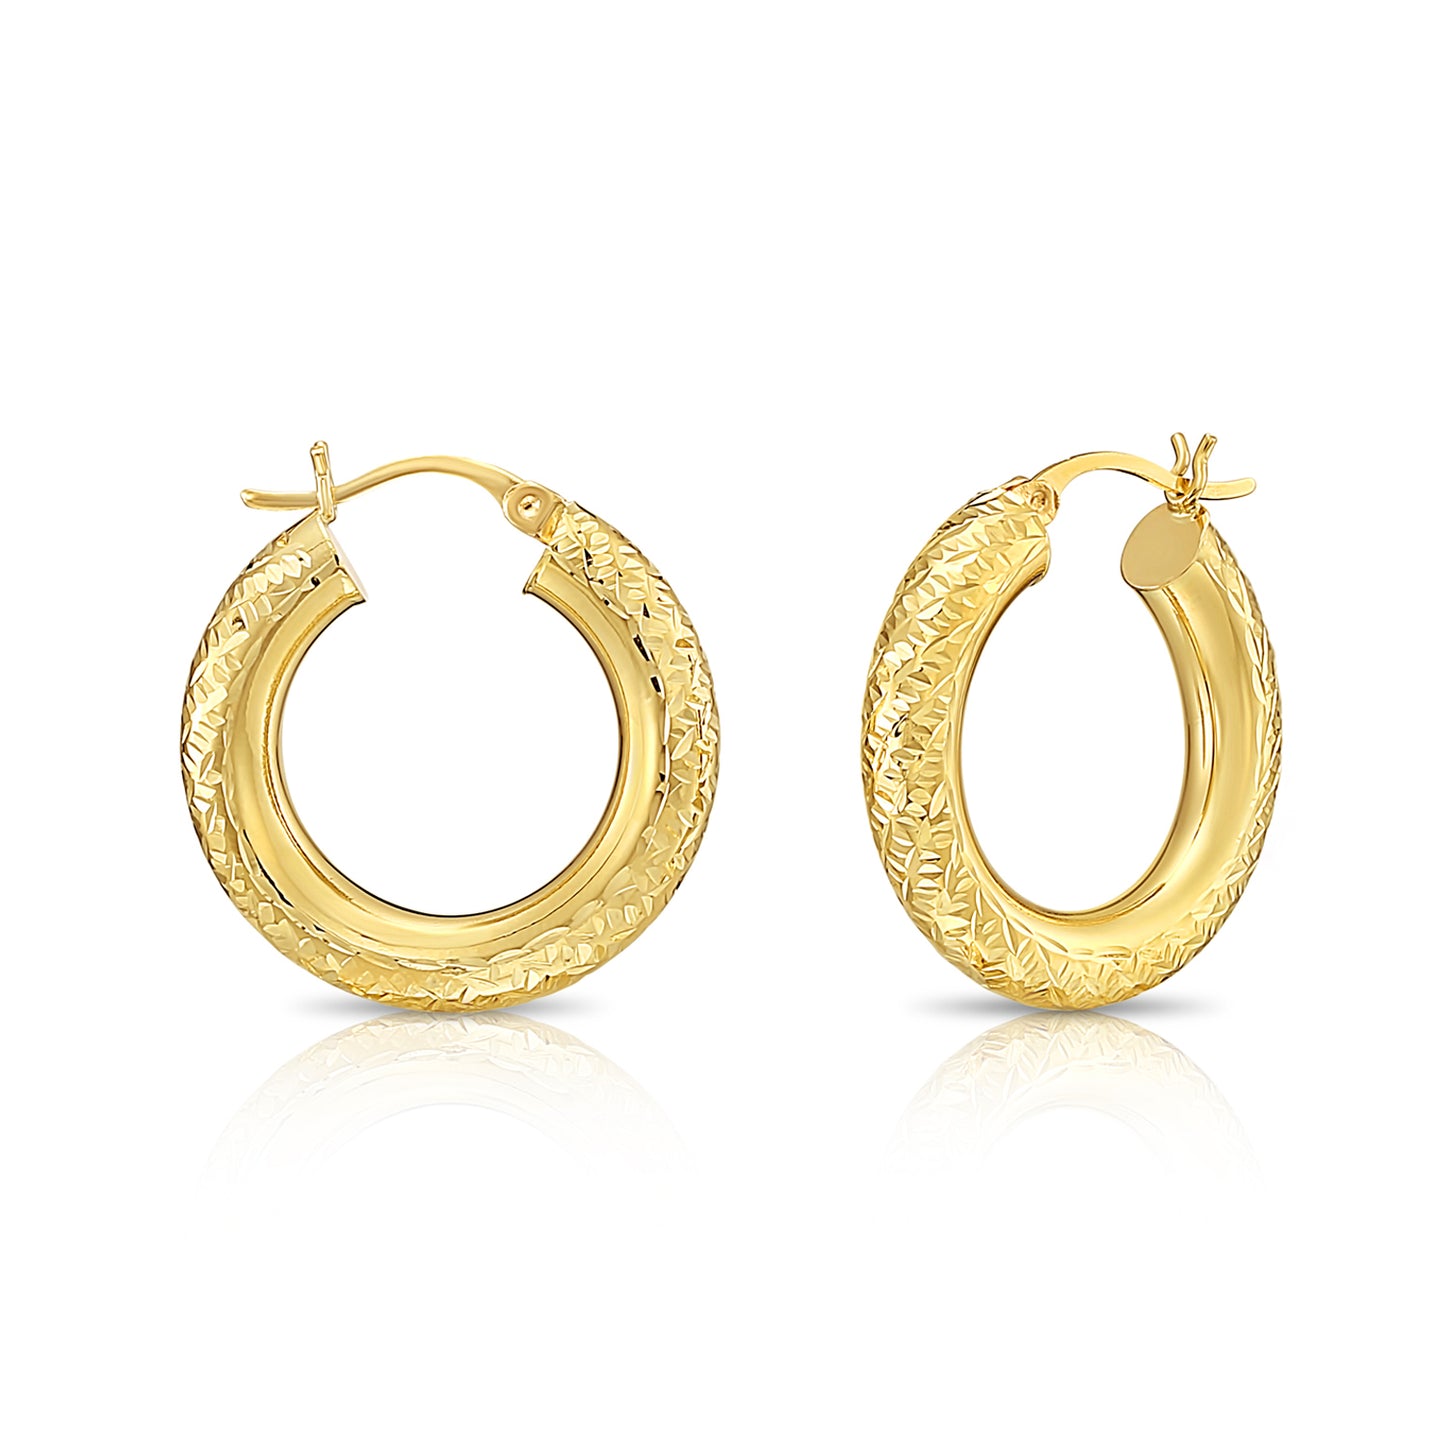 14K Yellow Gold Checkered Hand Engraving Hoop Earrings - 1 inch 30mm (1.2 inch)